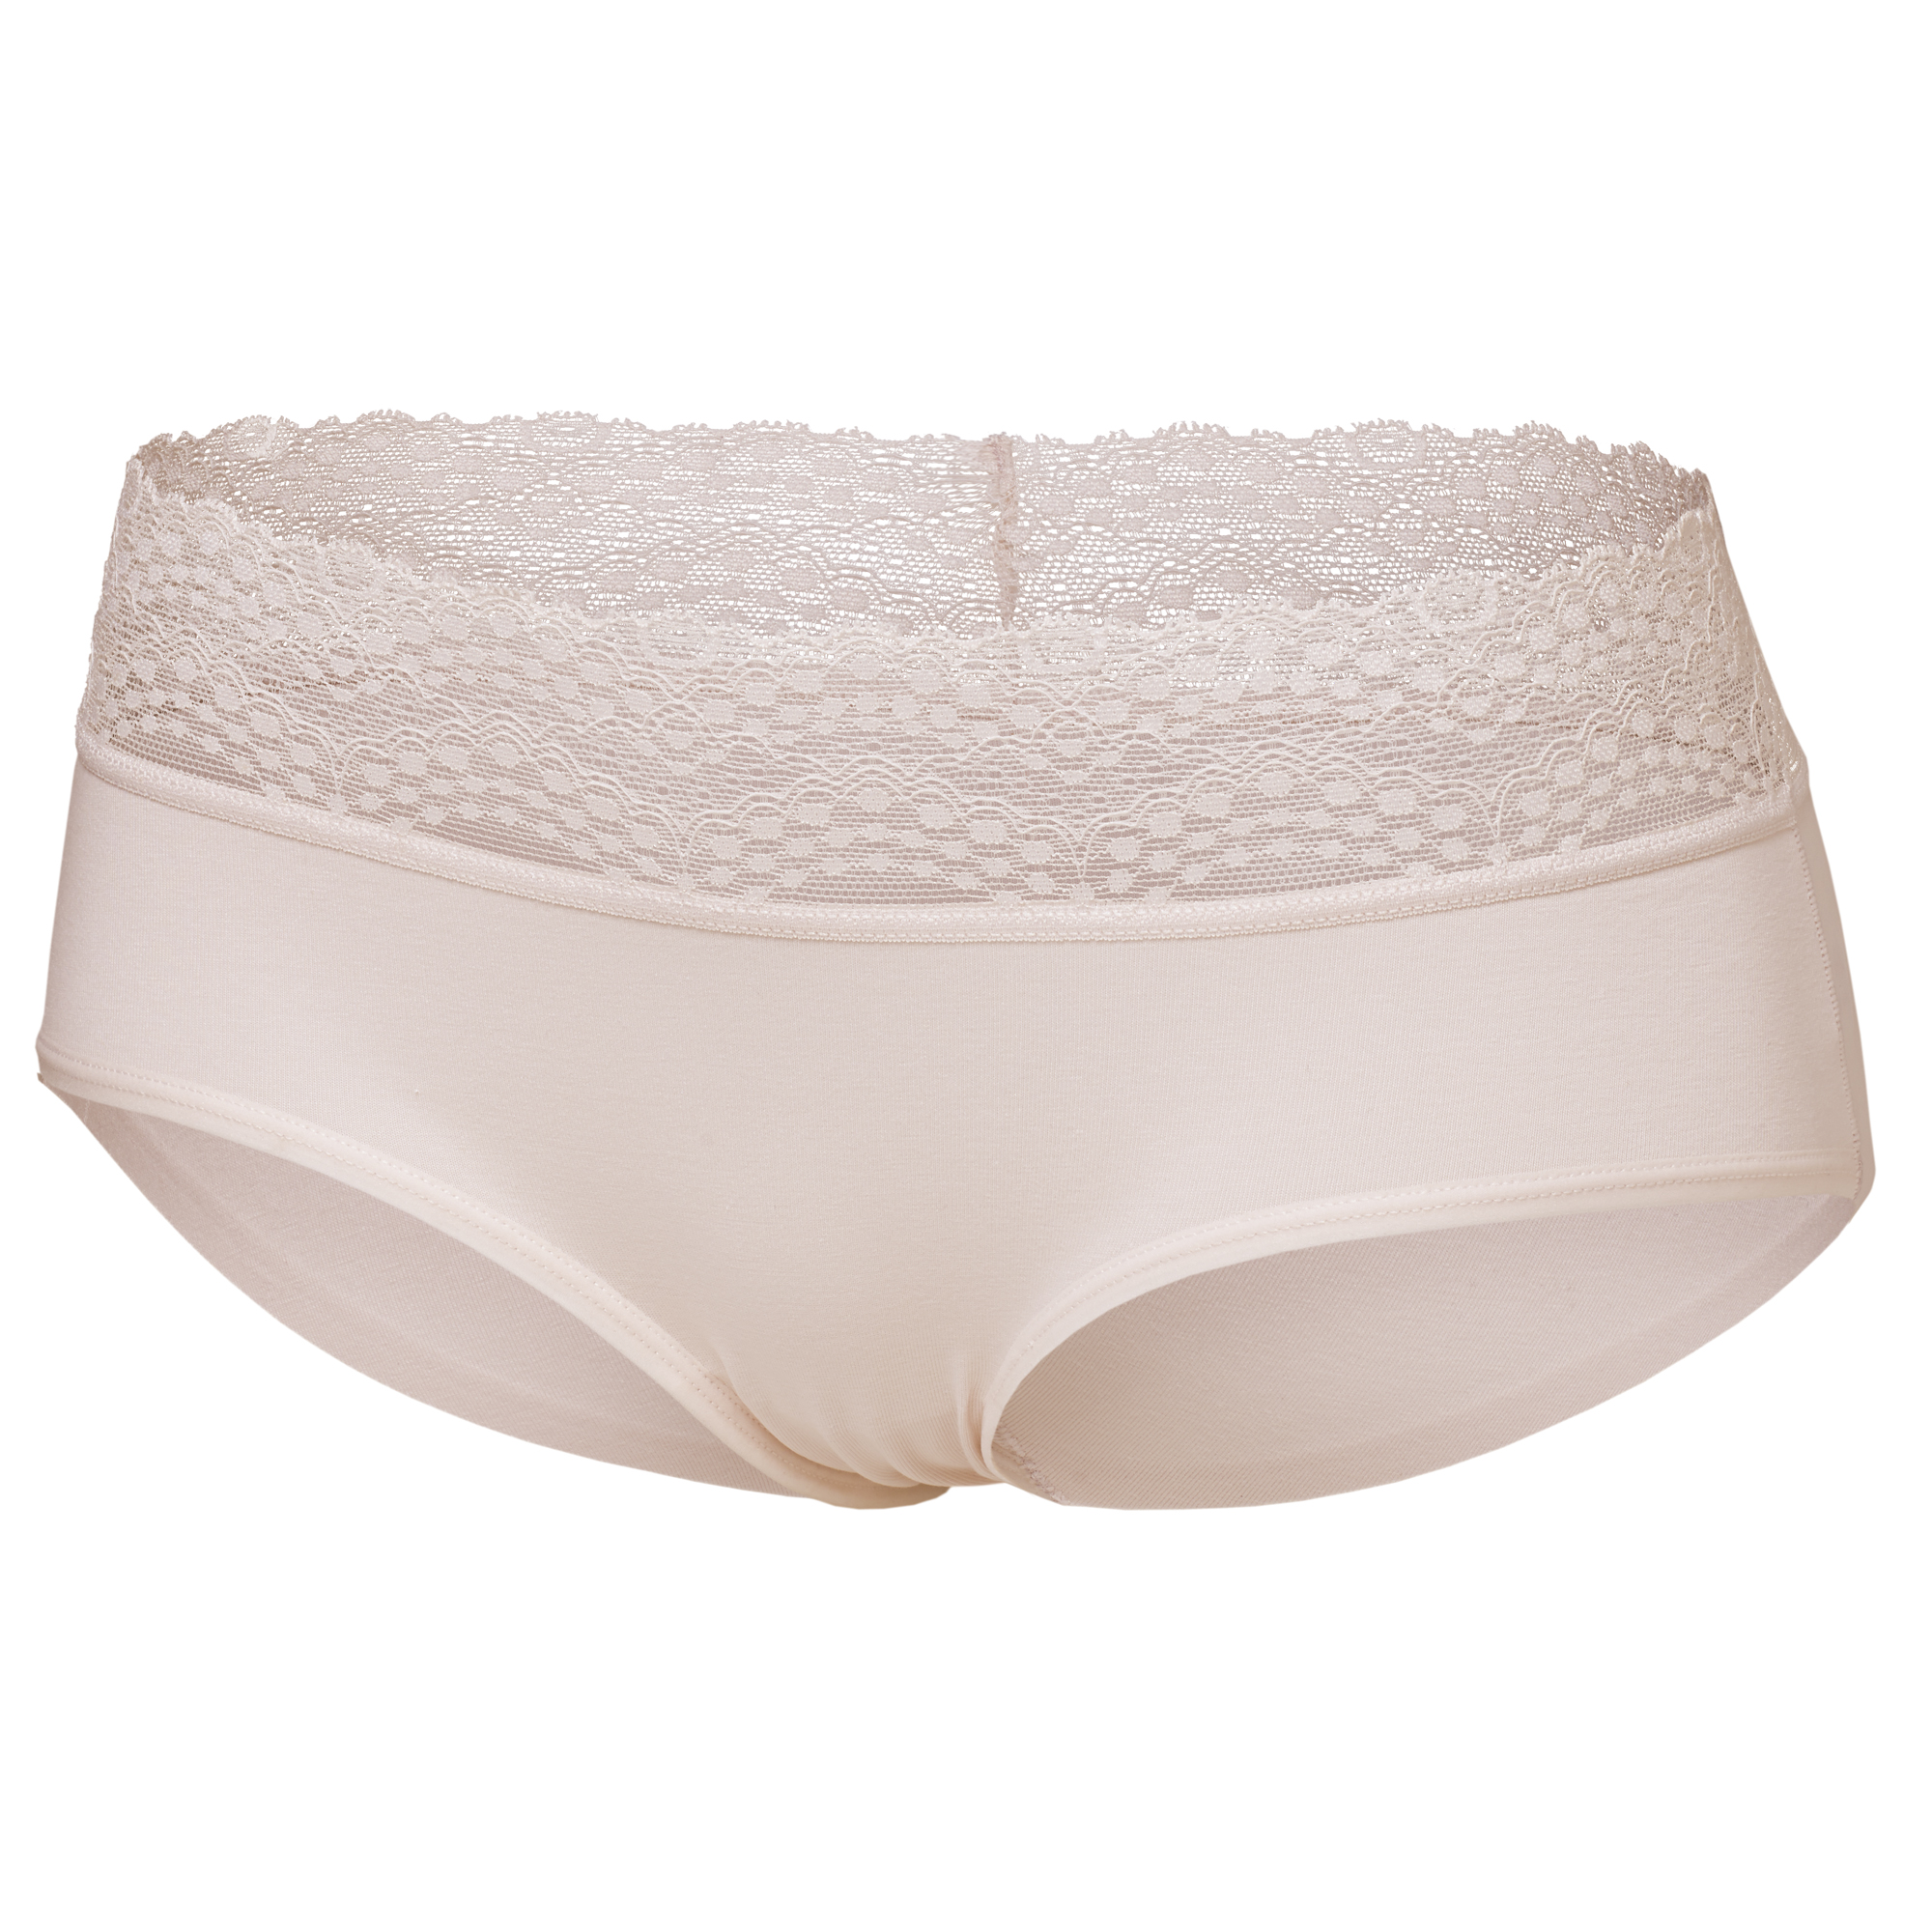 INV. COTTON HIPSTER LACE White Sand, white sand (web), hi-res